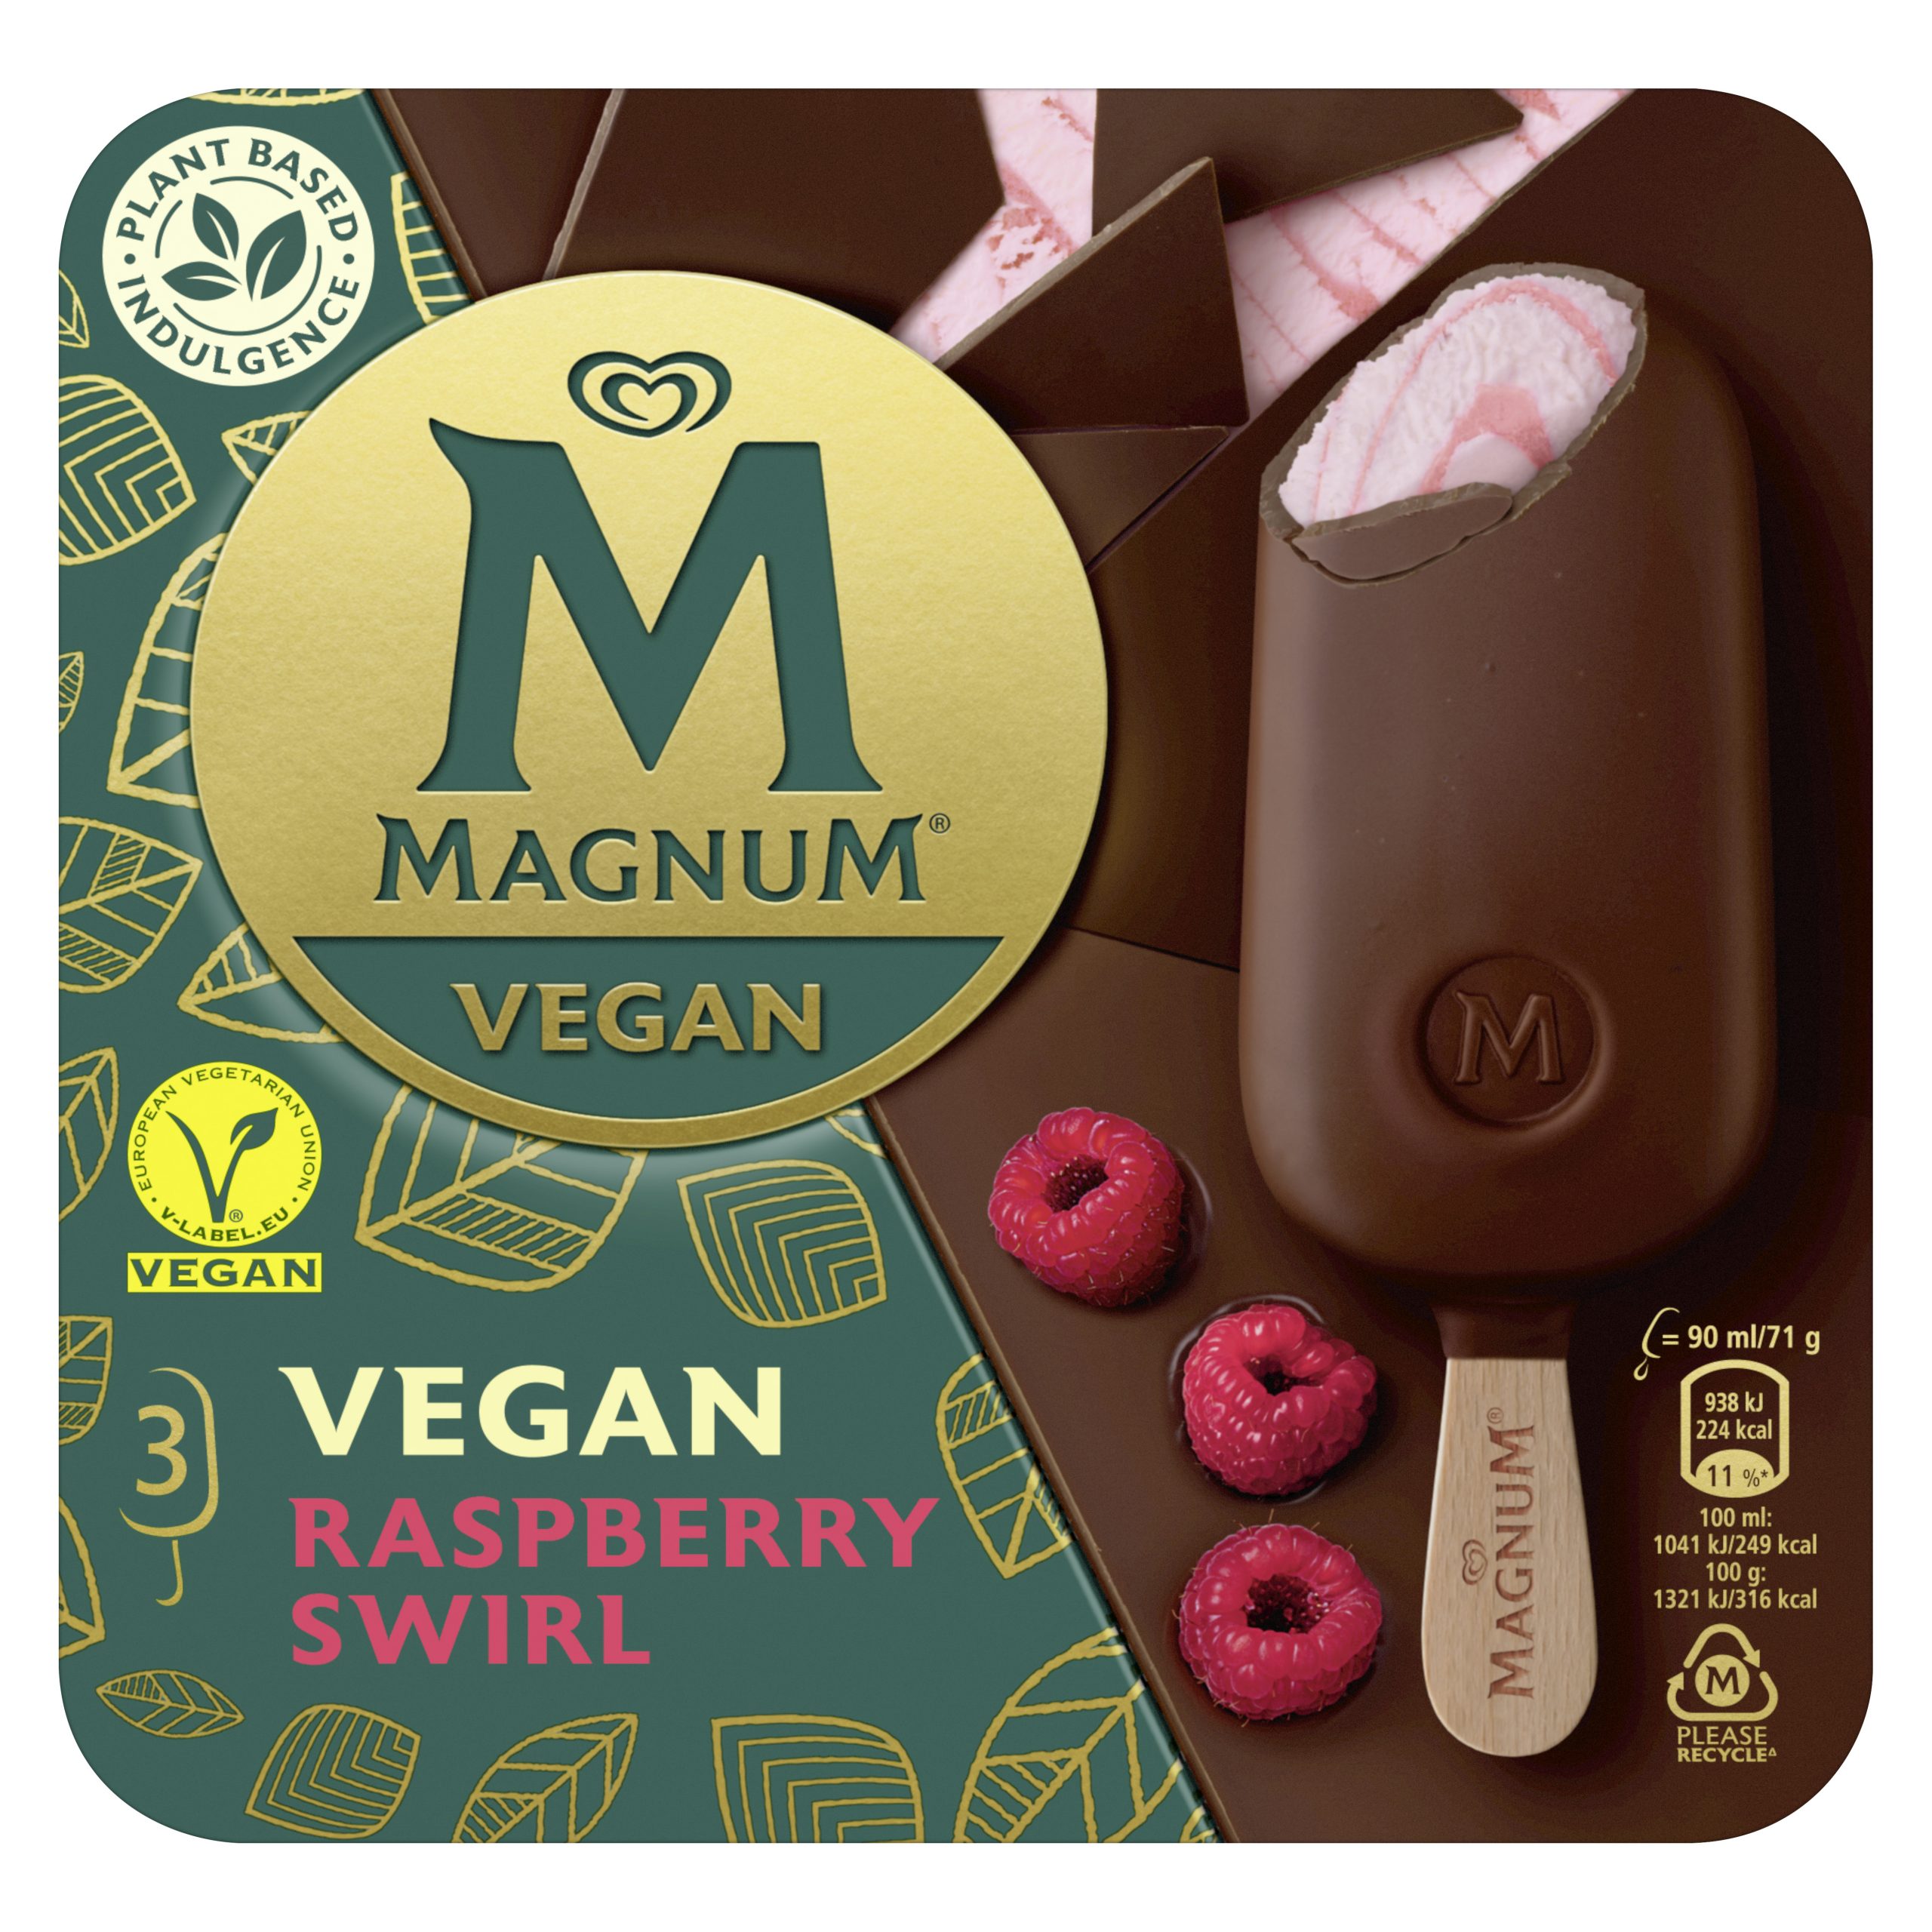 Magnum welcomes 2023 with new innovations